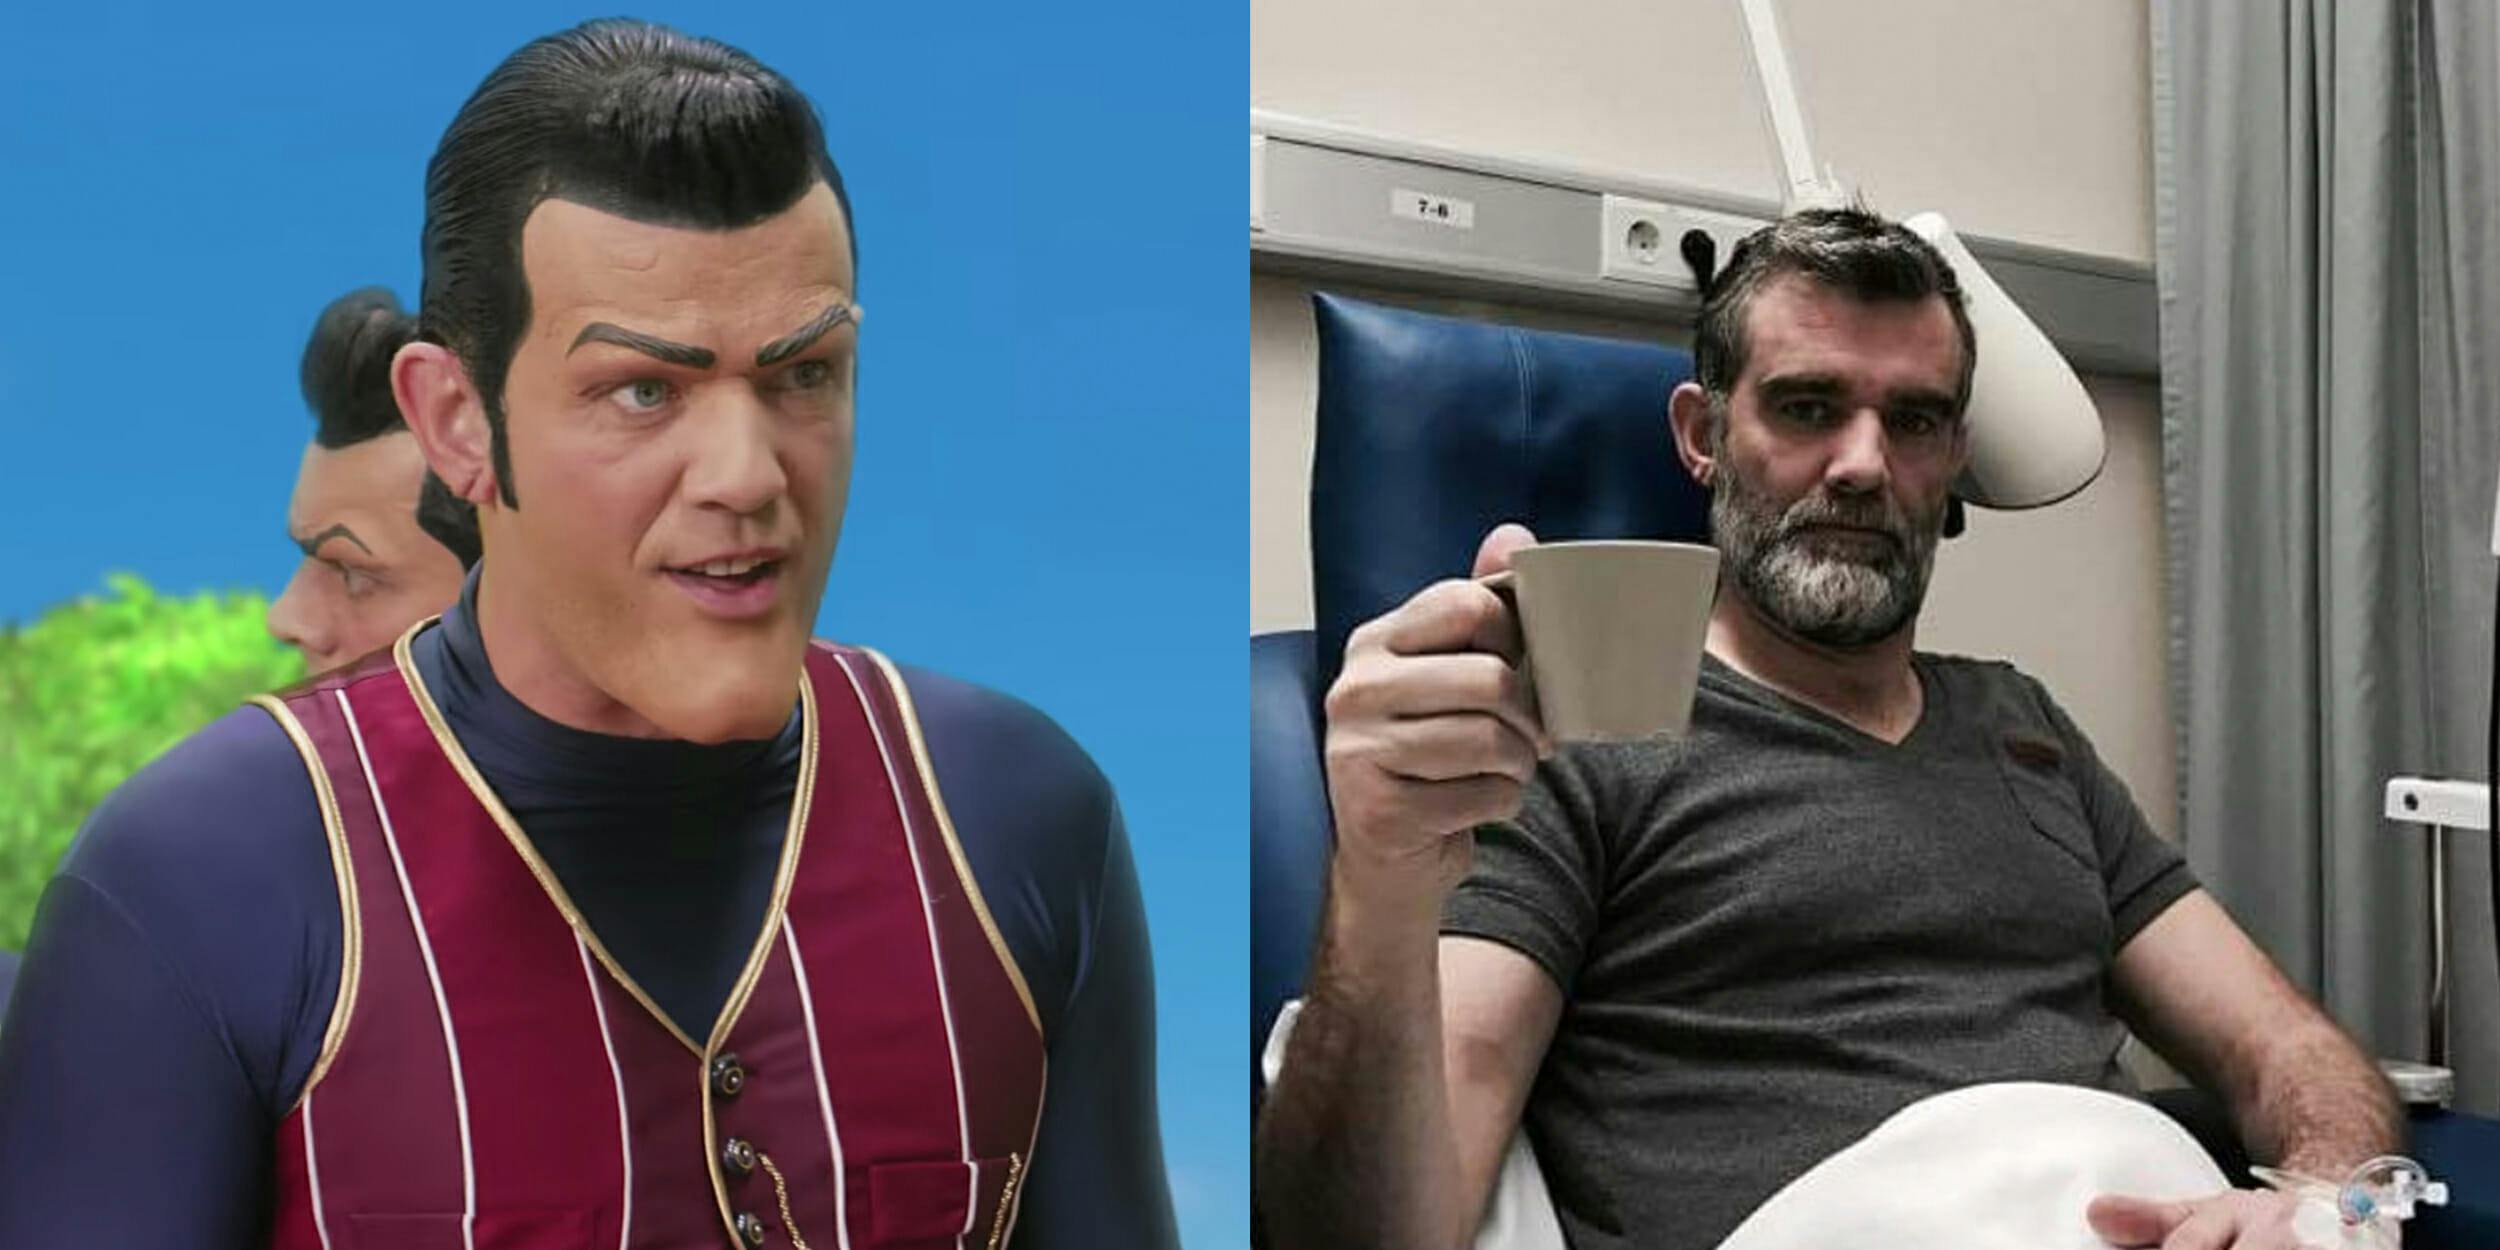 Reddit meme king and LazyTown actor Stefán Karl Stefánsson died Tuesday. He was 43.